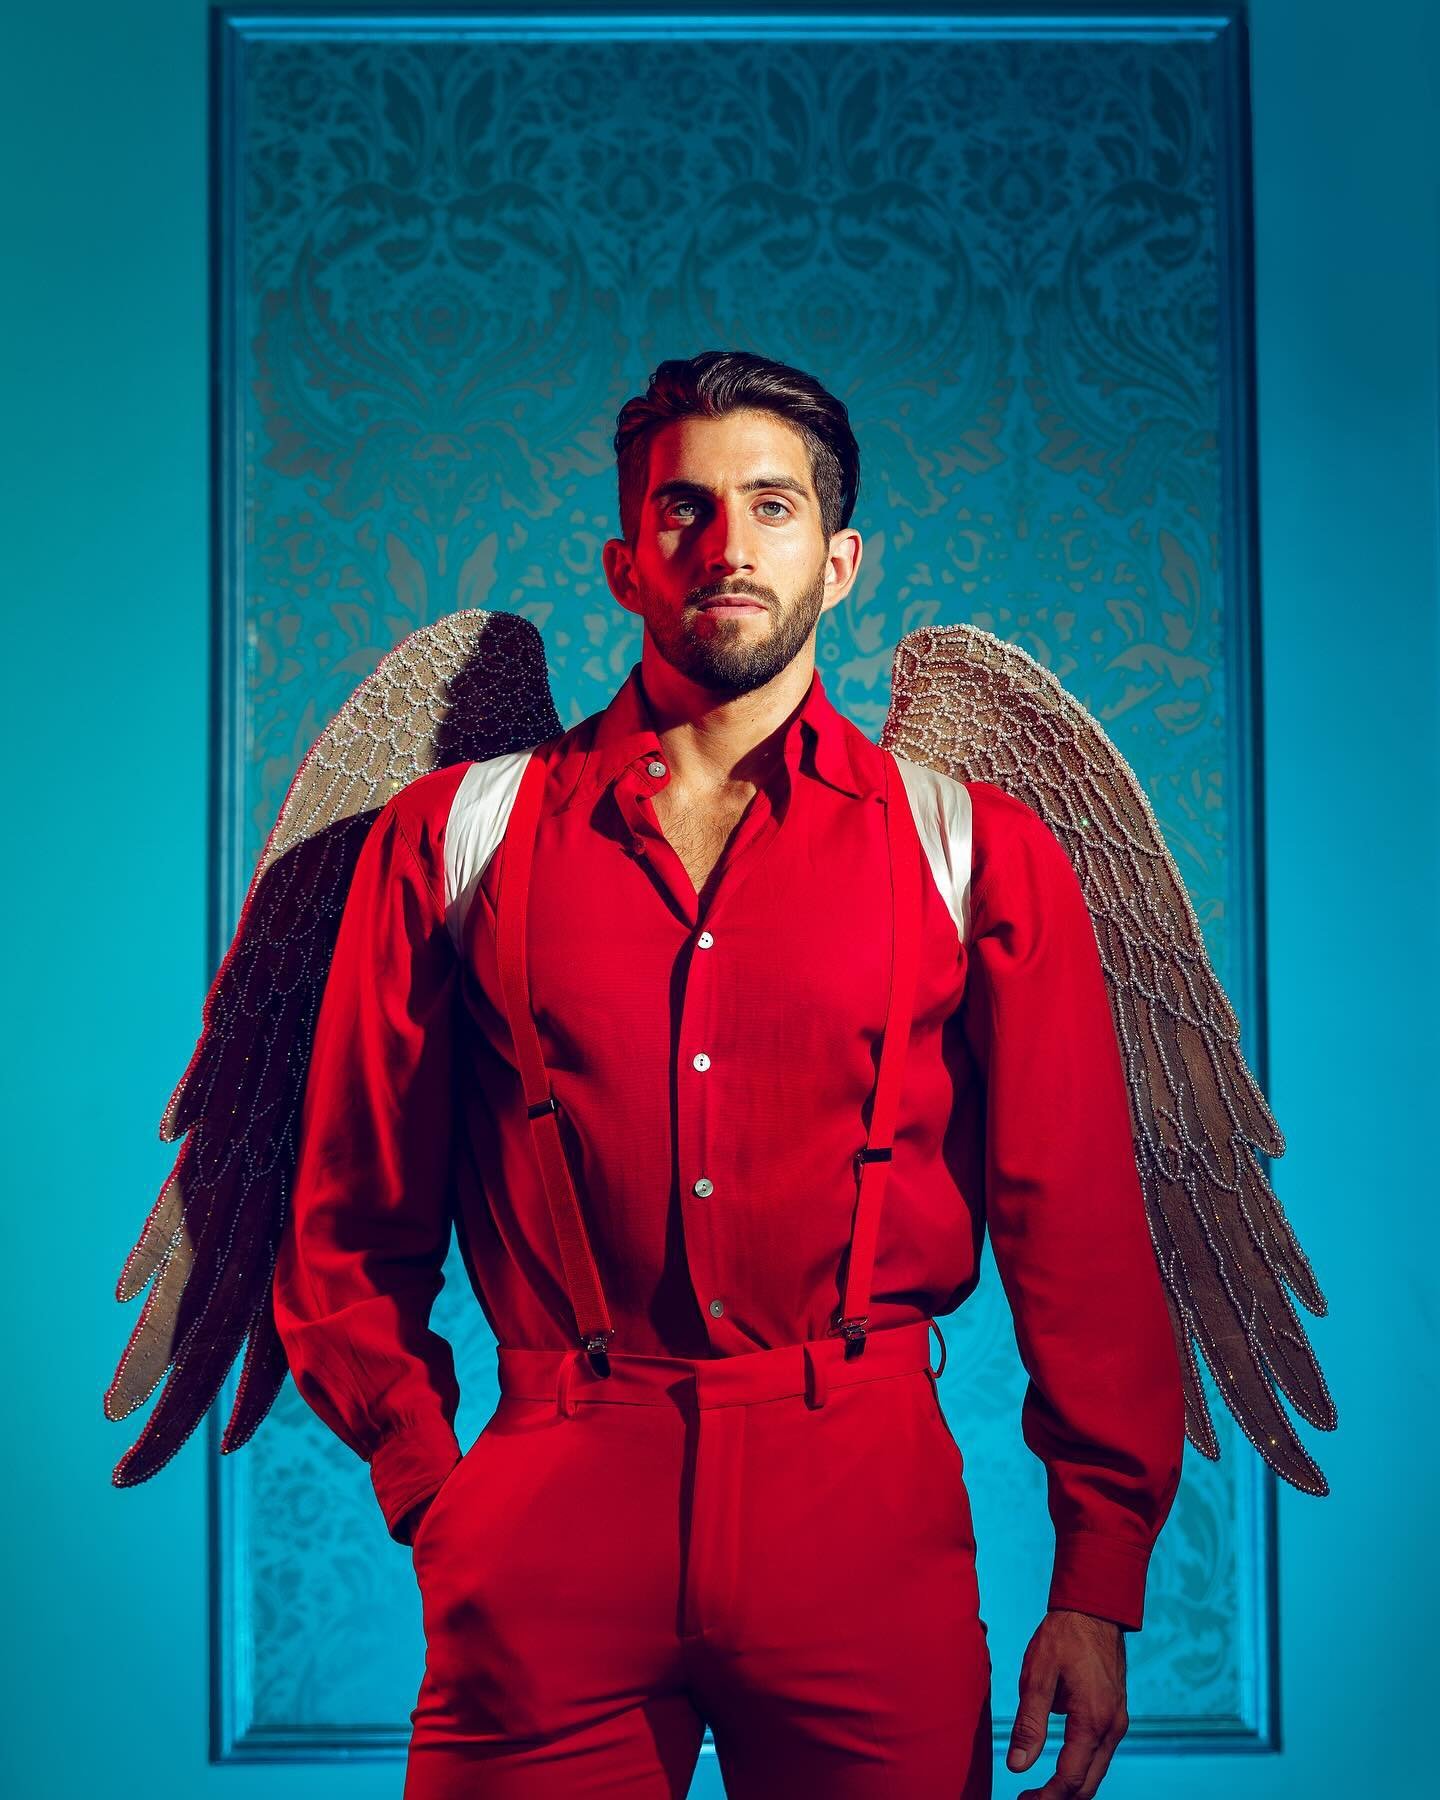 From a shoot with model/angel @johnny_thackway, with wings by @ccmillinerycreations 
...
#portrait #angel #colour #colourgels #photoshoot #photography #male #malemodel #editorial #fashion #creative #godox #lightshapers #canon